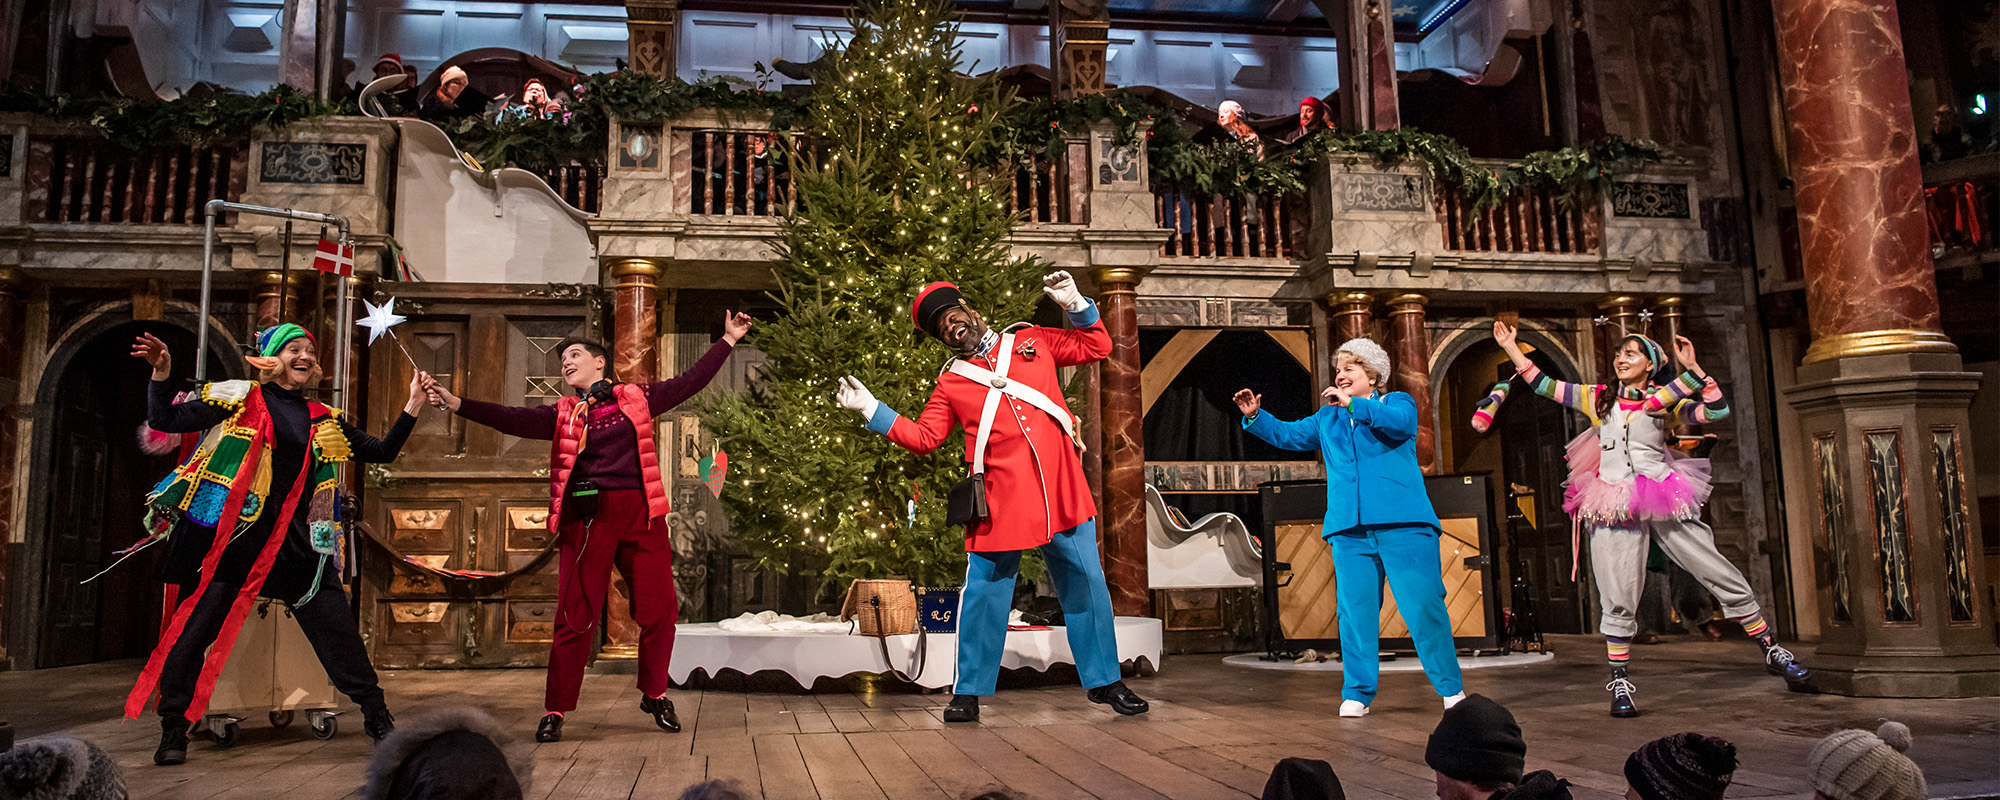 The cast of 'Christmas at the (Snow) Globe' dance in front of a Christmas tree